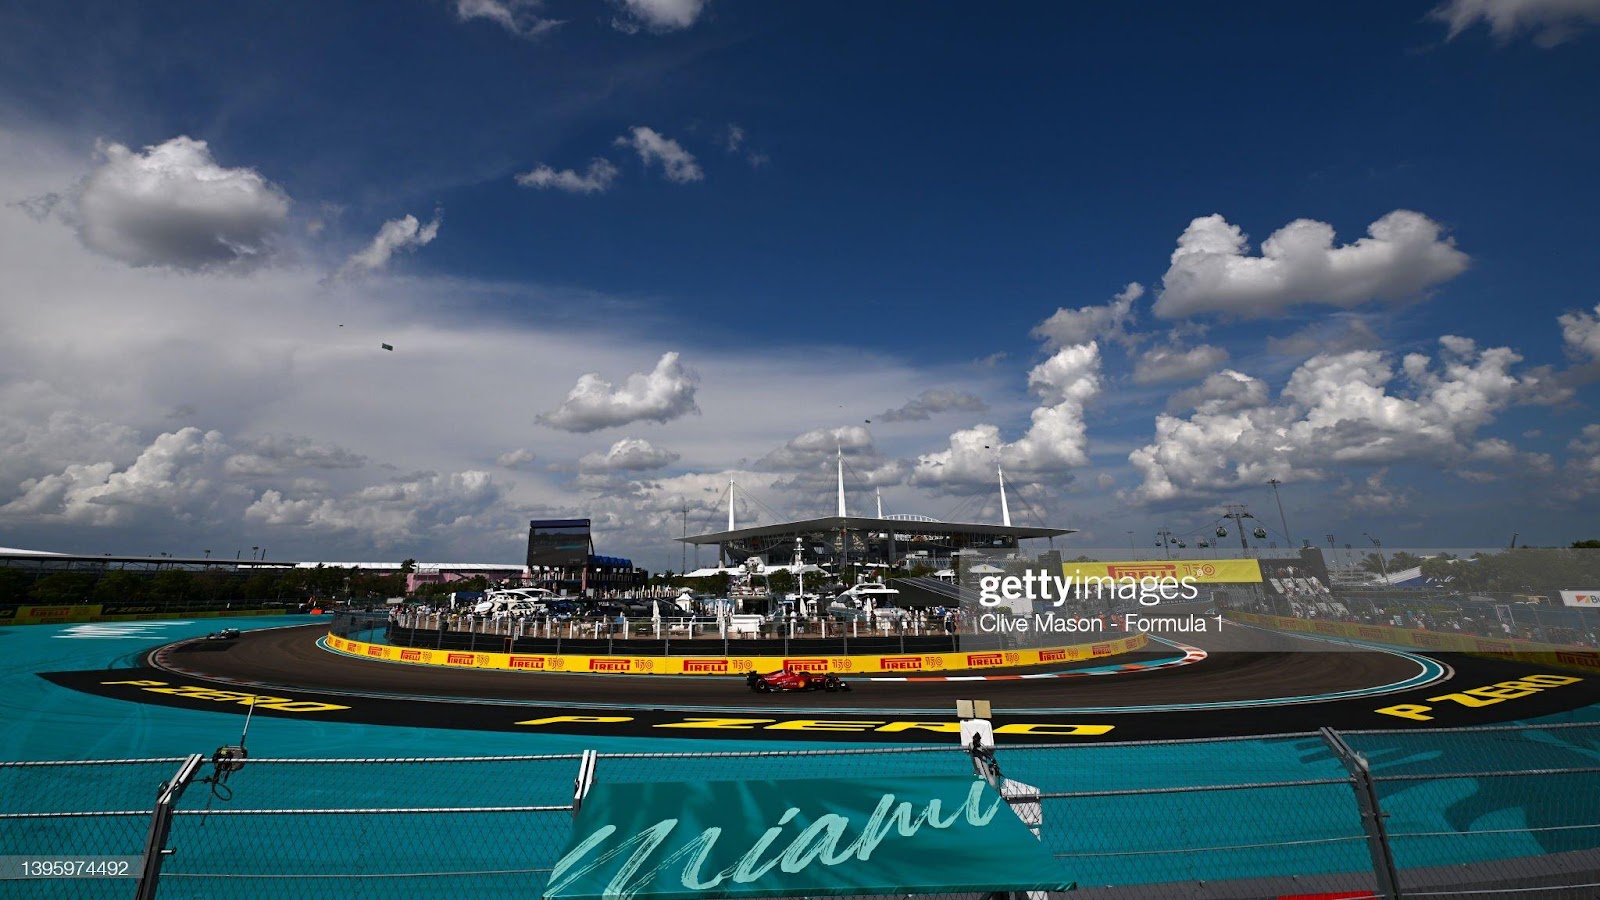 D:\Documenti\posts\posts\Miami\New folder\circuit\charles-leclerc-of-monaco-driving-the-ferrari-f175-on-track-during-picture-id1395974492.jpg